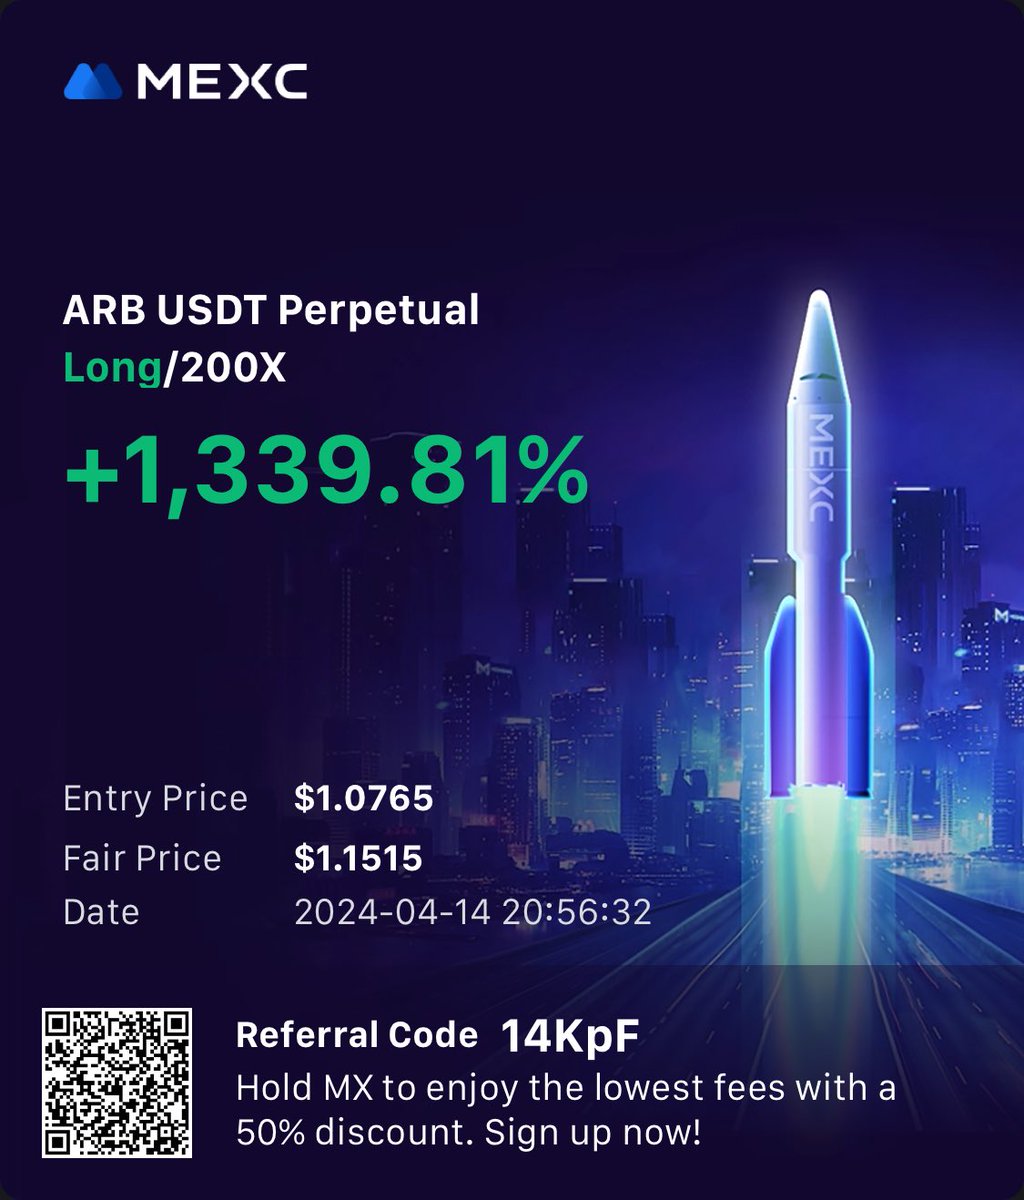 It’s really not recommended it’s just a post ✌️$ARB